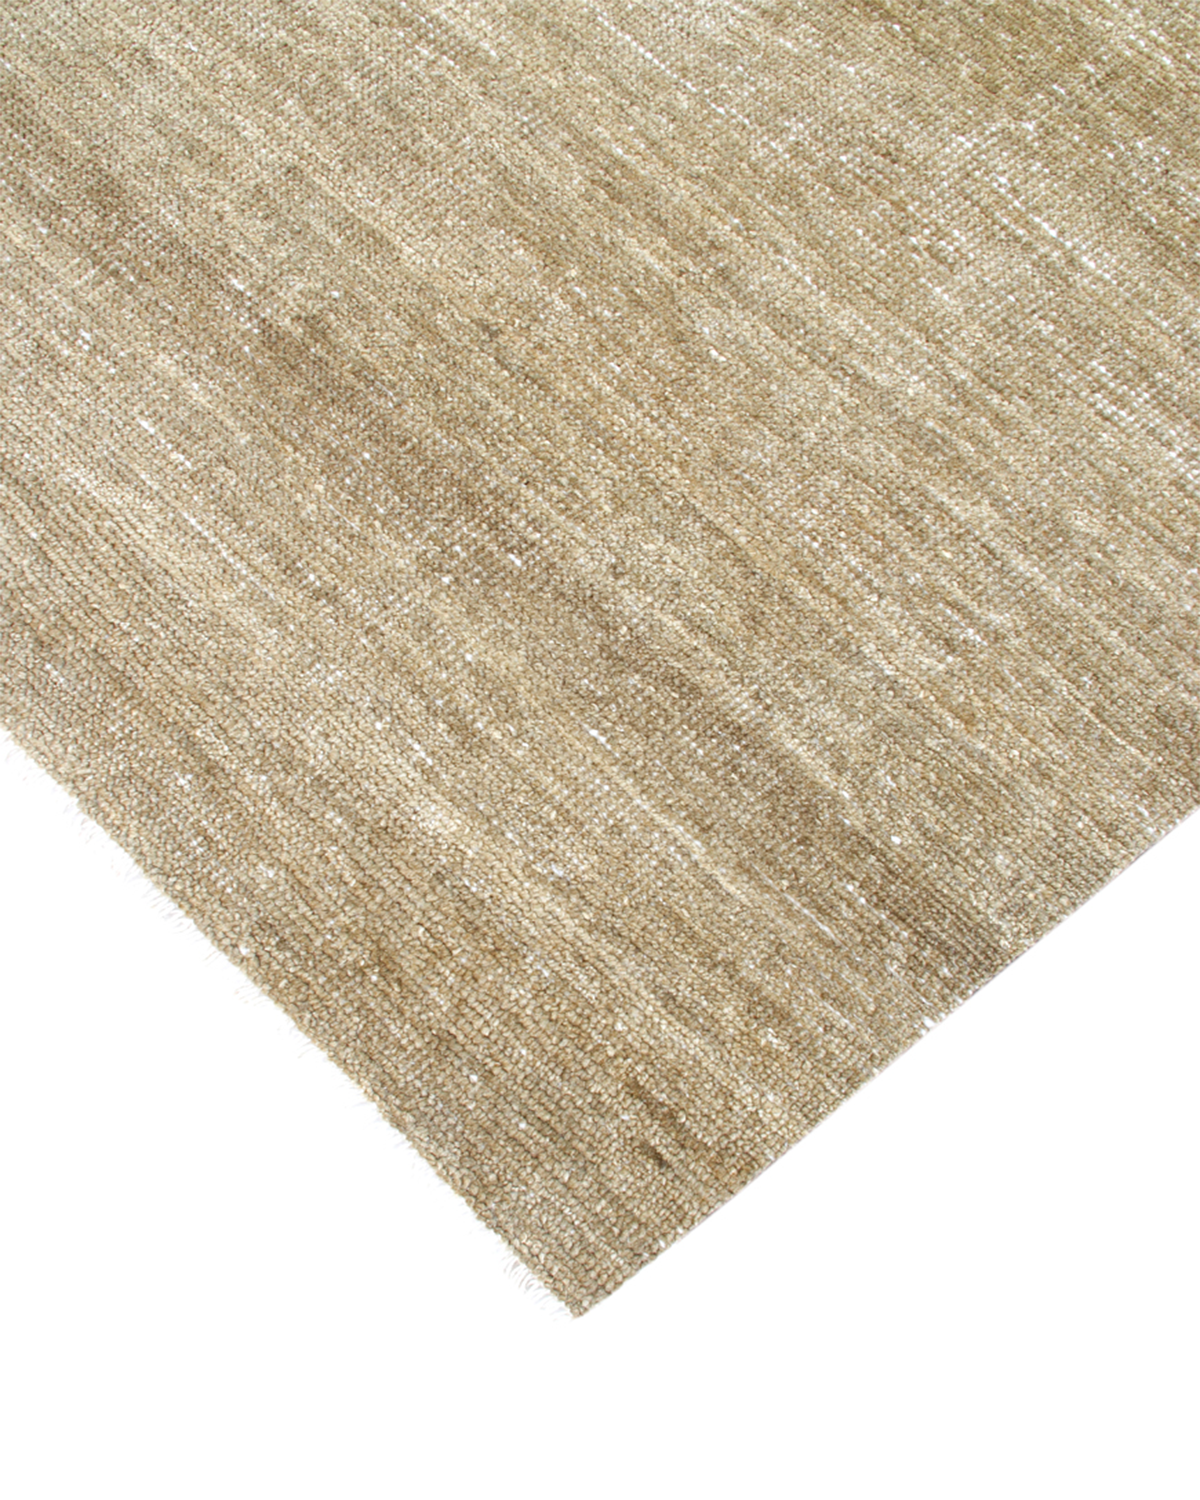 Hand-knotted Modern Rug (Plain-1)